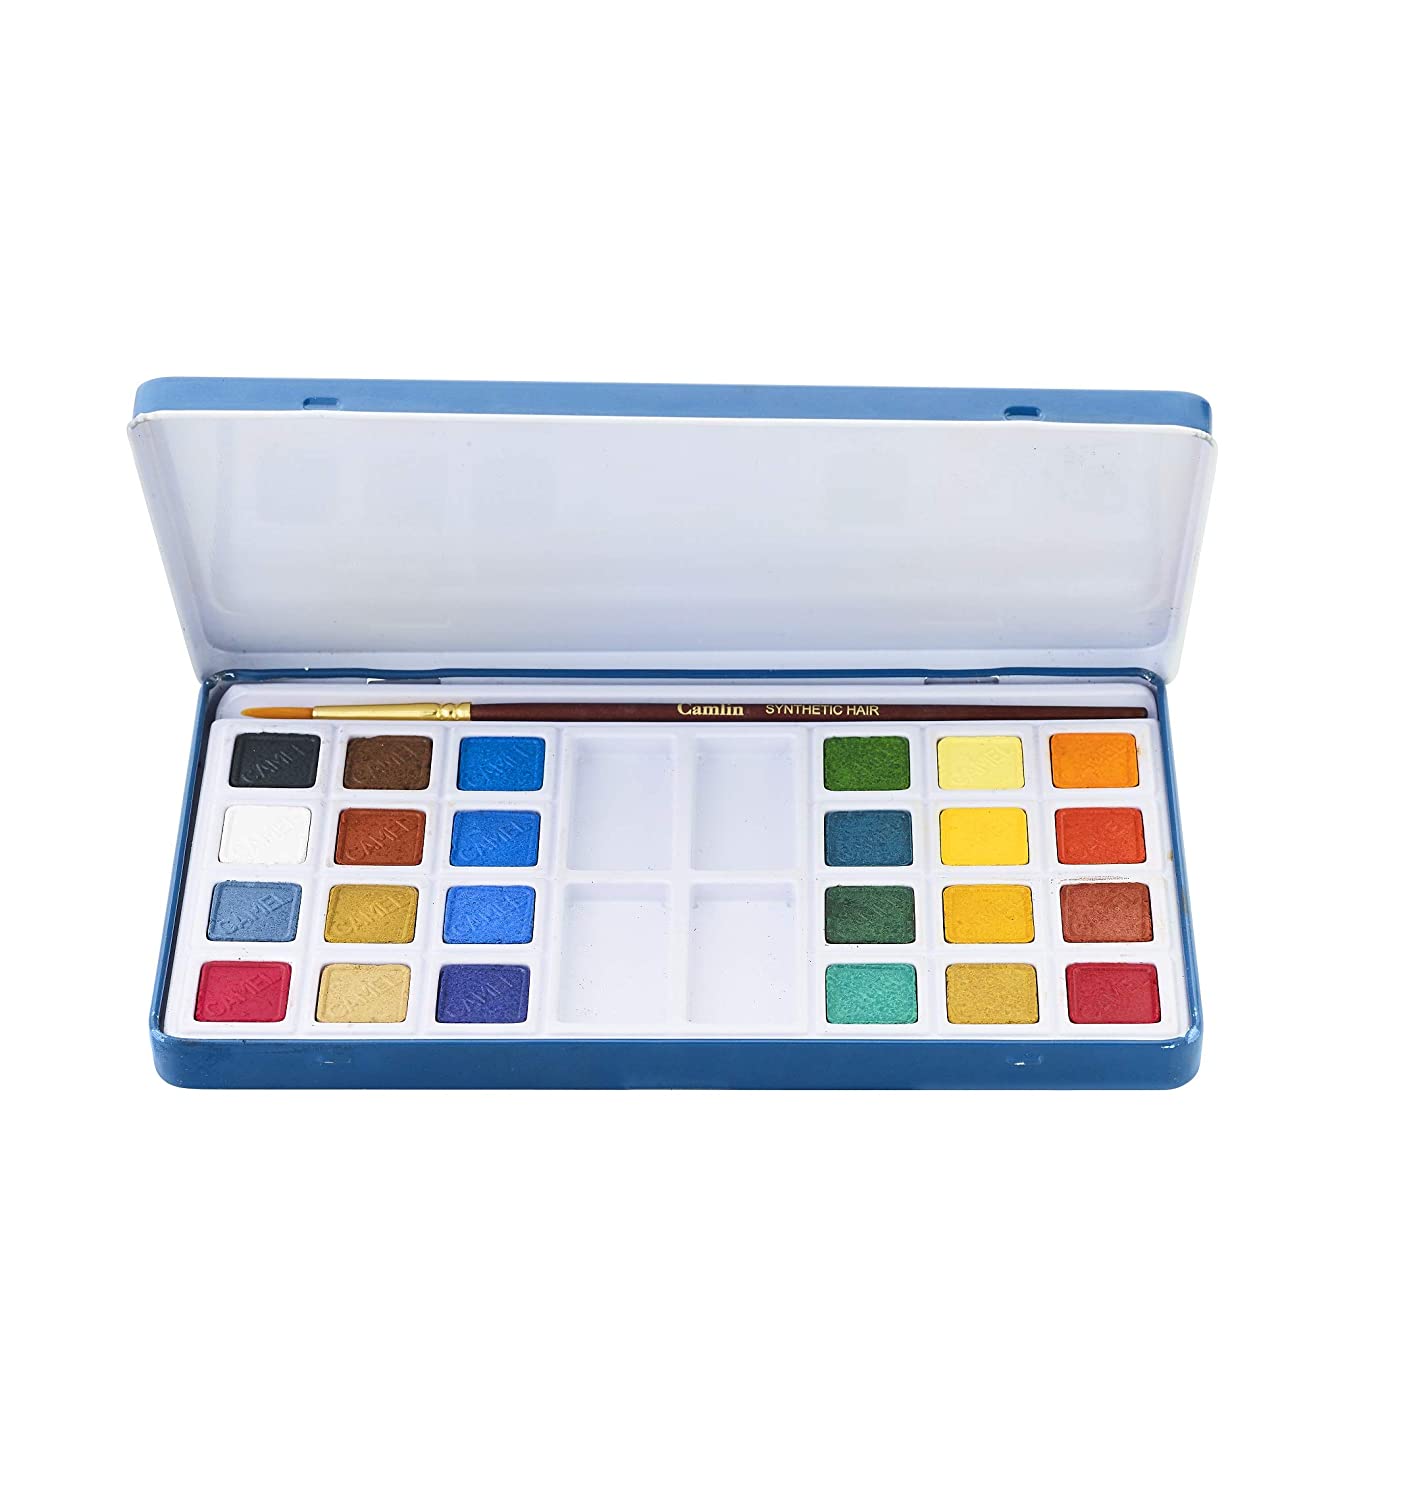 Camel Artist Water Colour Cake Set - Pack of 24 - Starbox